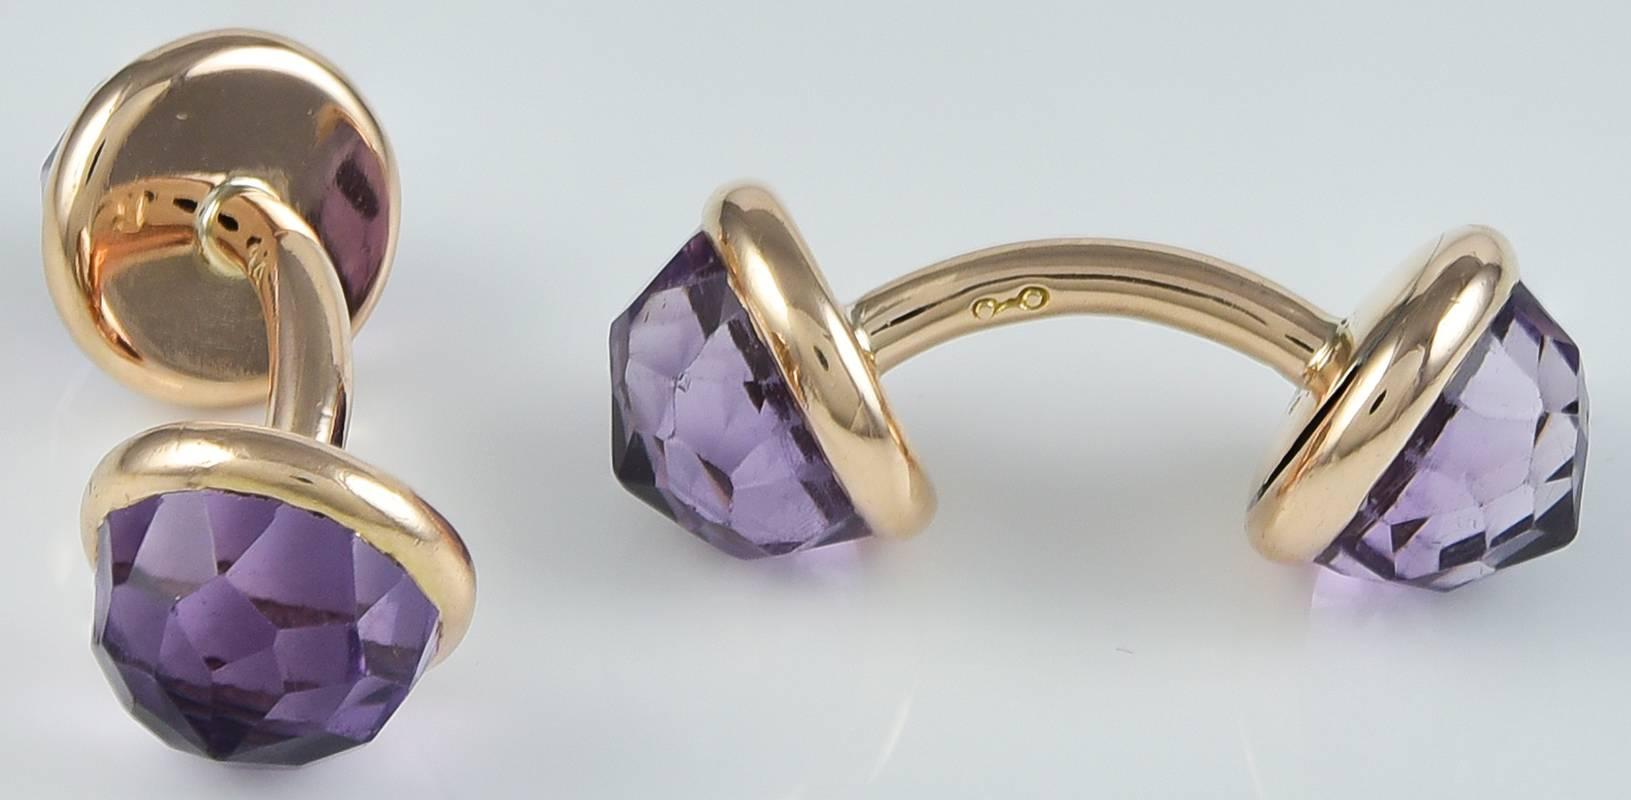 Antique double-sided cufflinks. Faceted amethysts. Beautiful color, set in 14K yellow gold. 1-1/4